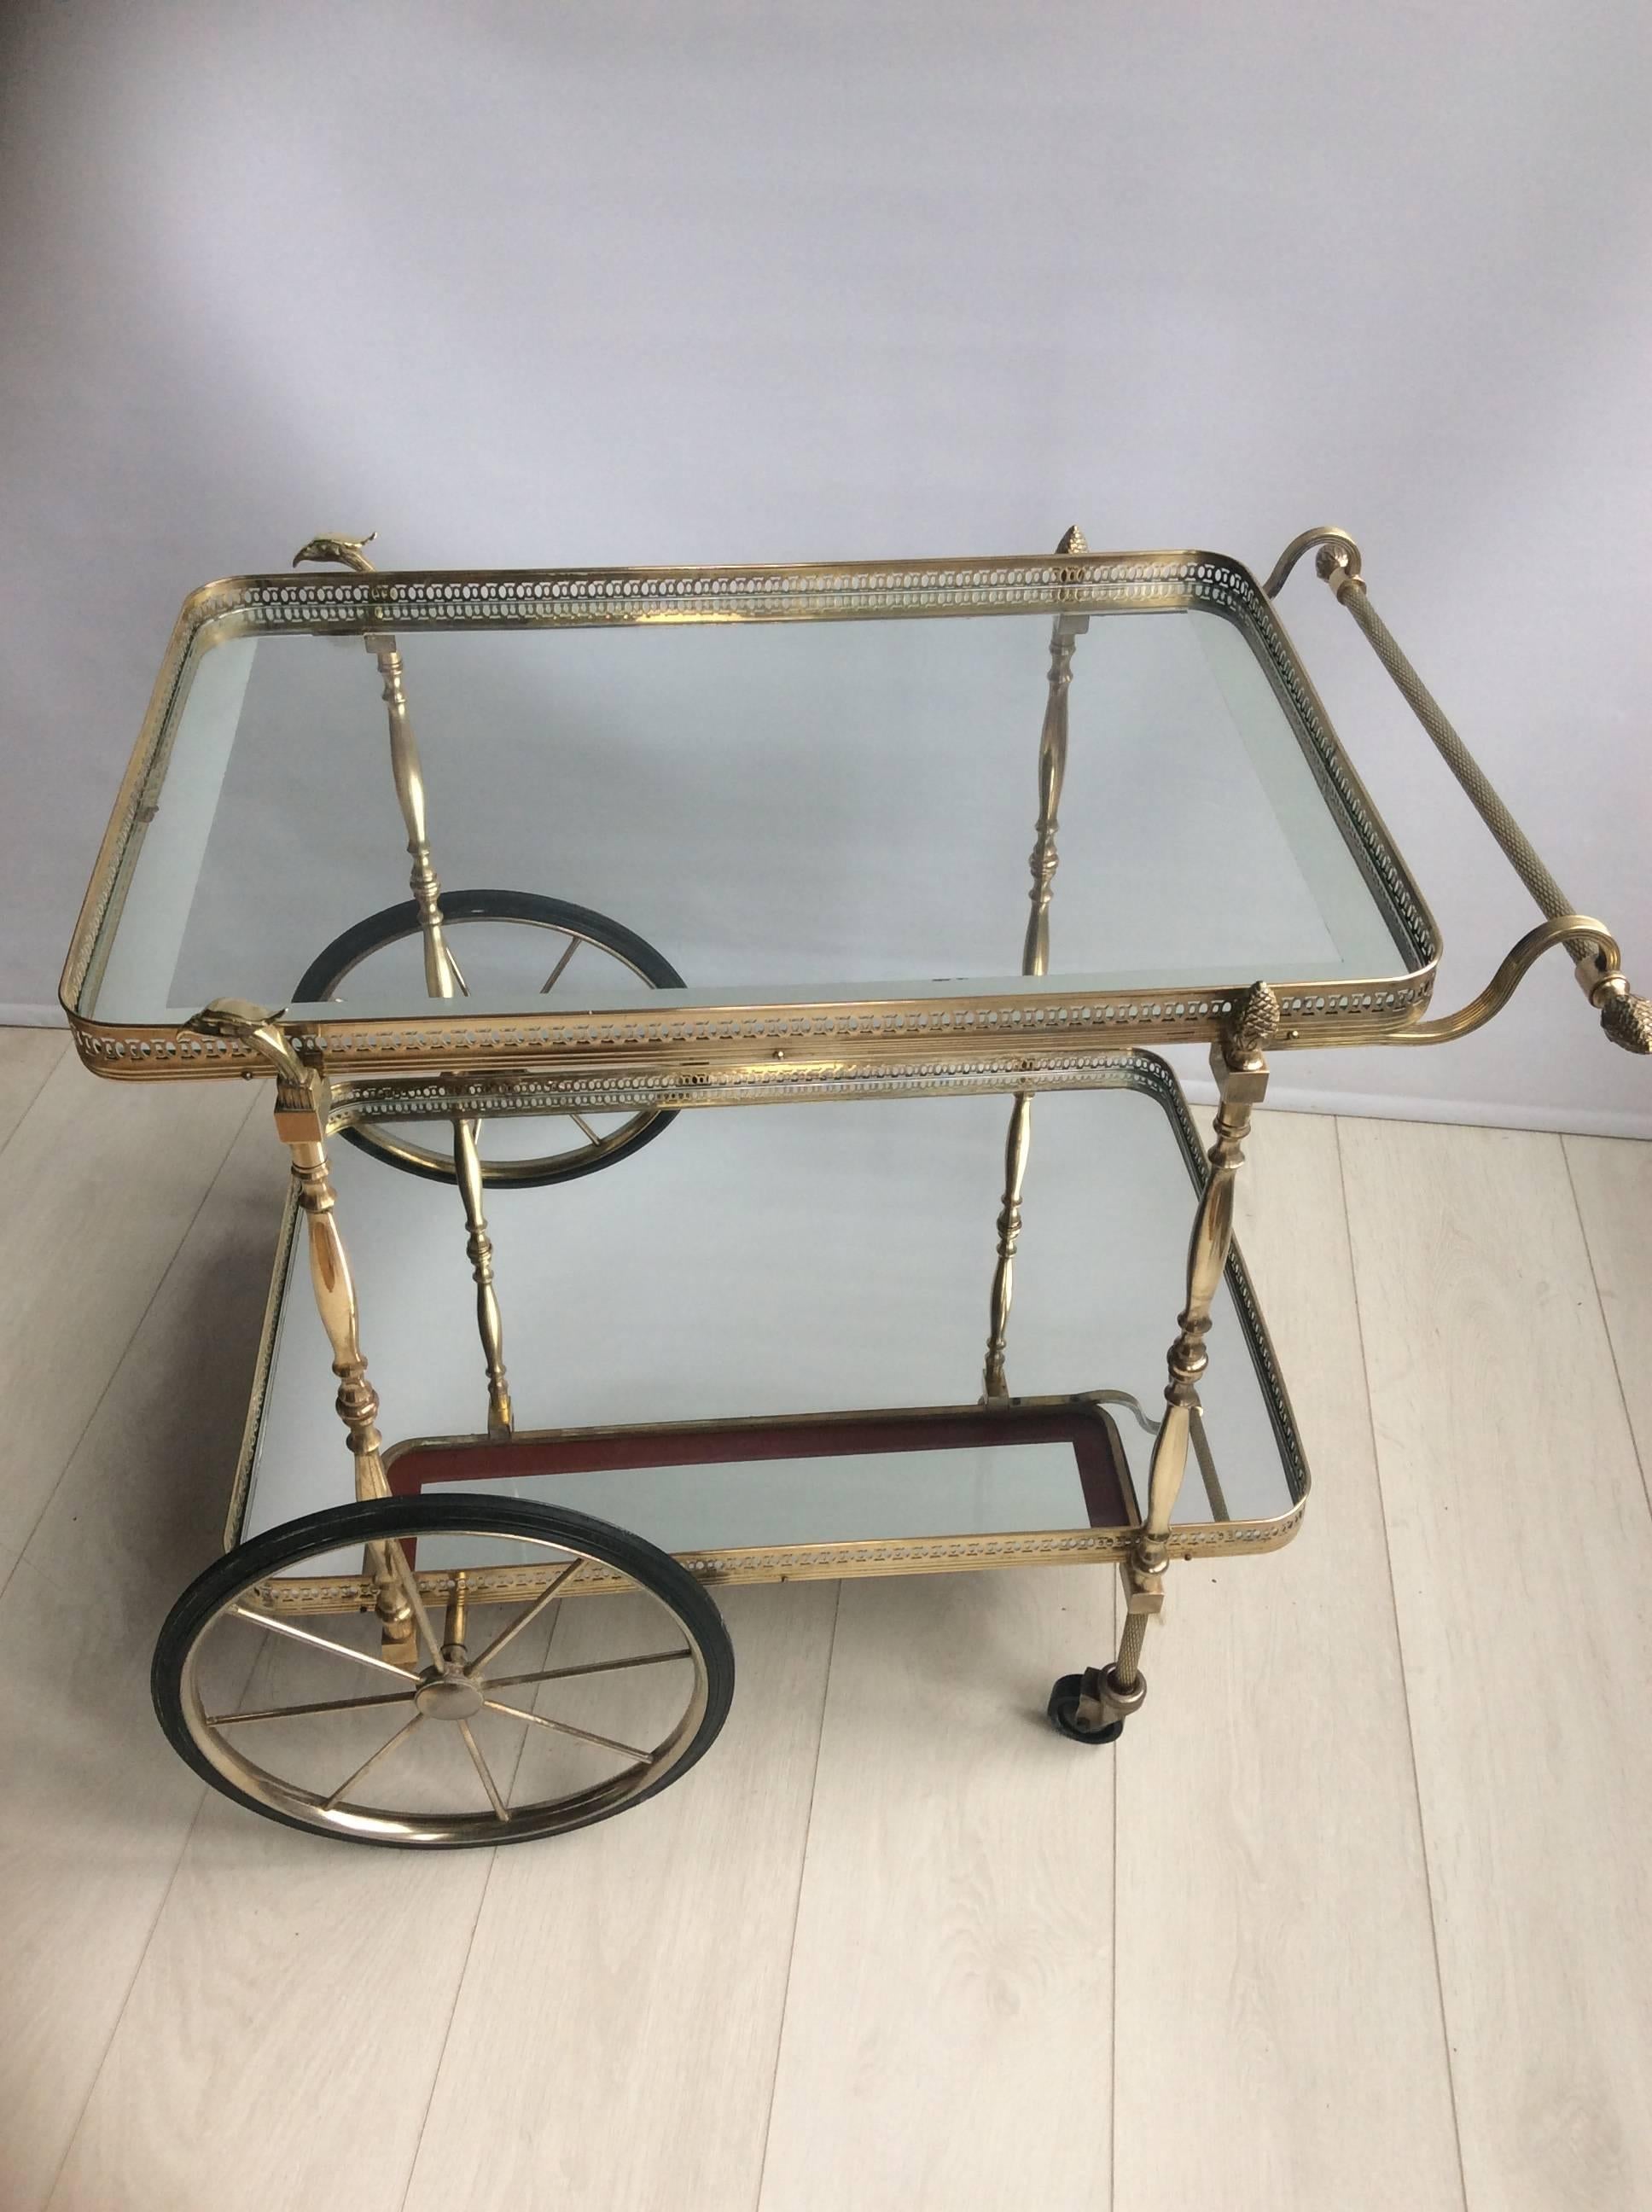 Highly decorative drinks trolley from France, circa 1950

with mirrored lower shelf

Top tray measures 66.5 cm wide, 46 cm deep and stands 59.5 cm to glass
Overall dimensions 80 cm wide, 60 cm deep and 62 cm tall.